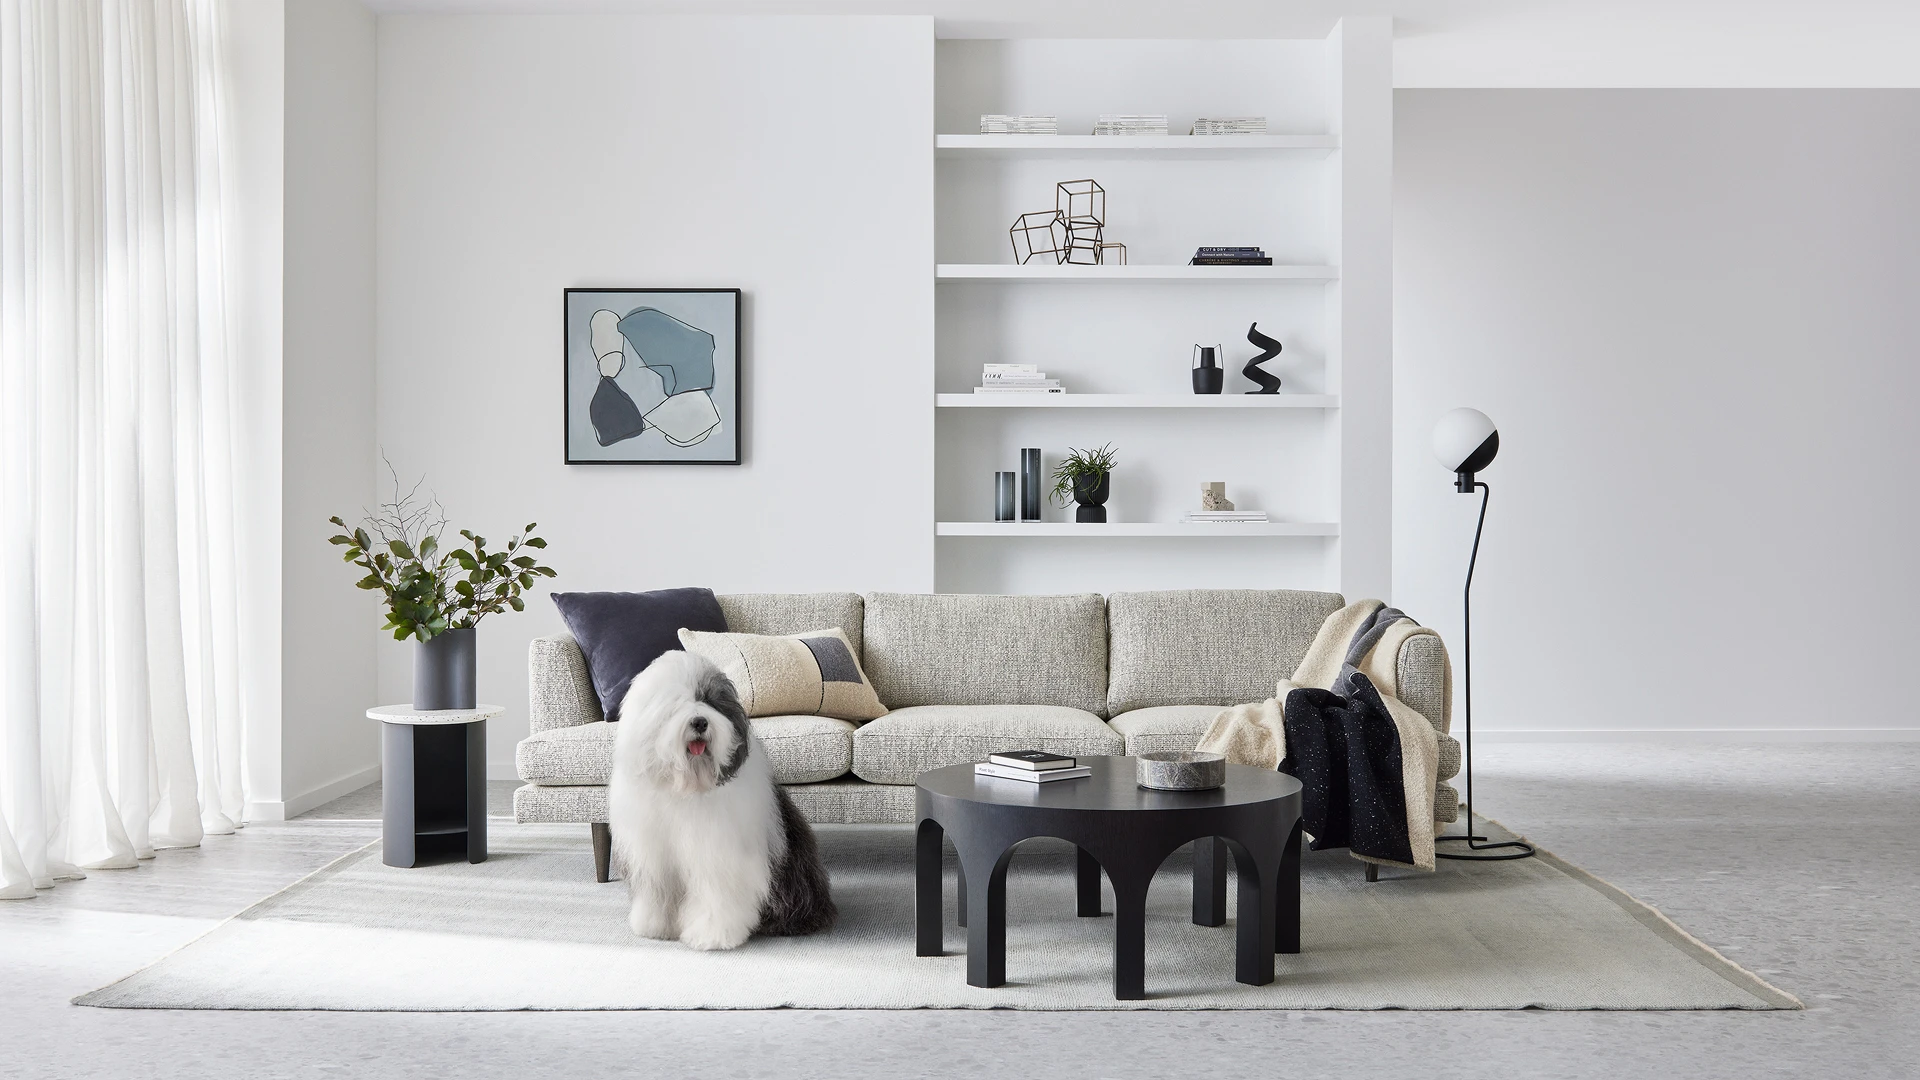 Alt text: Dulux dog sitting in front of lounge, beside coffee table in a living room.